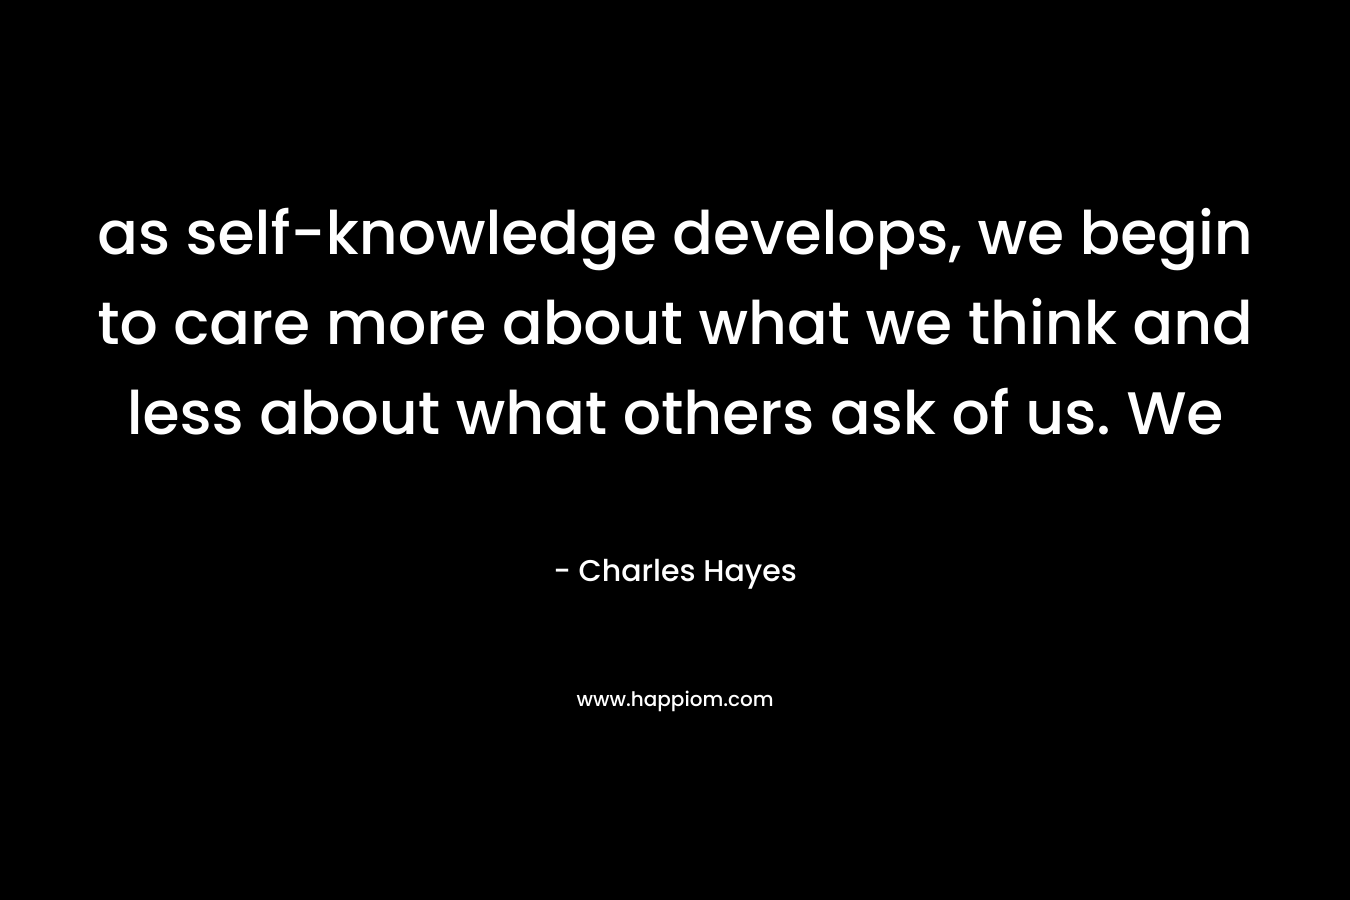 as self-knowledge develops, we begin to care more about what we think and less about what others ask of us. We